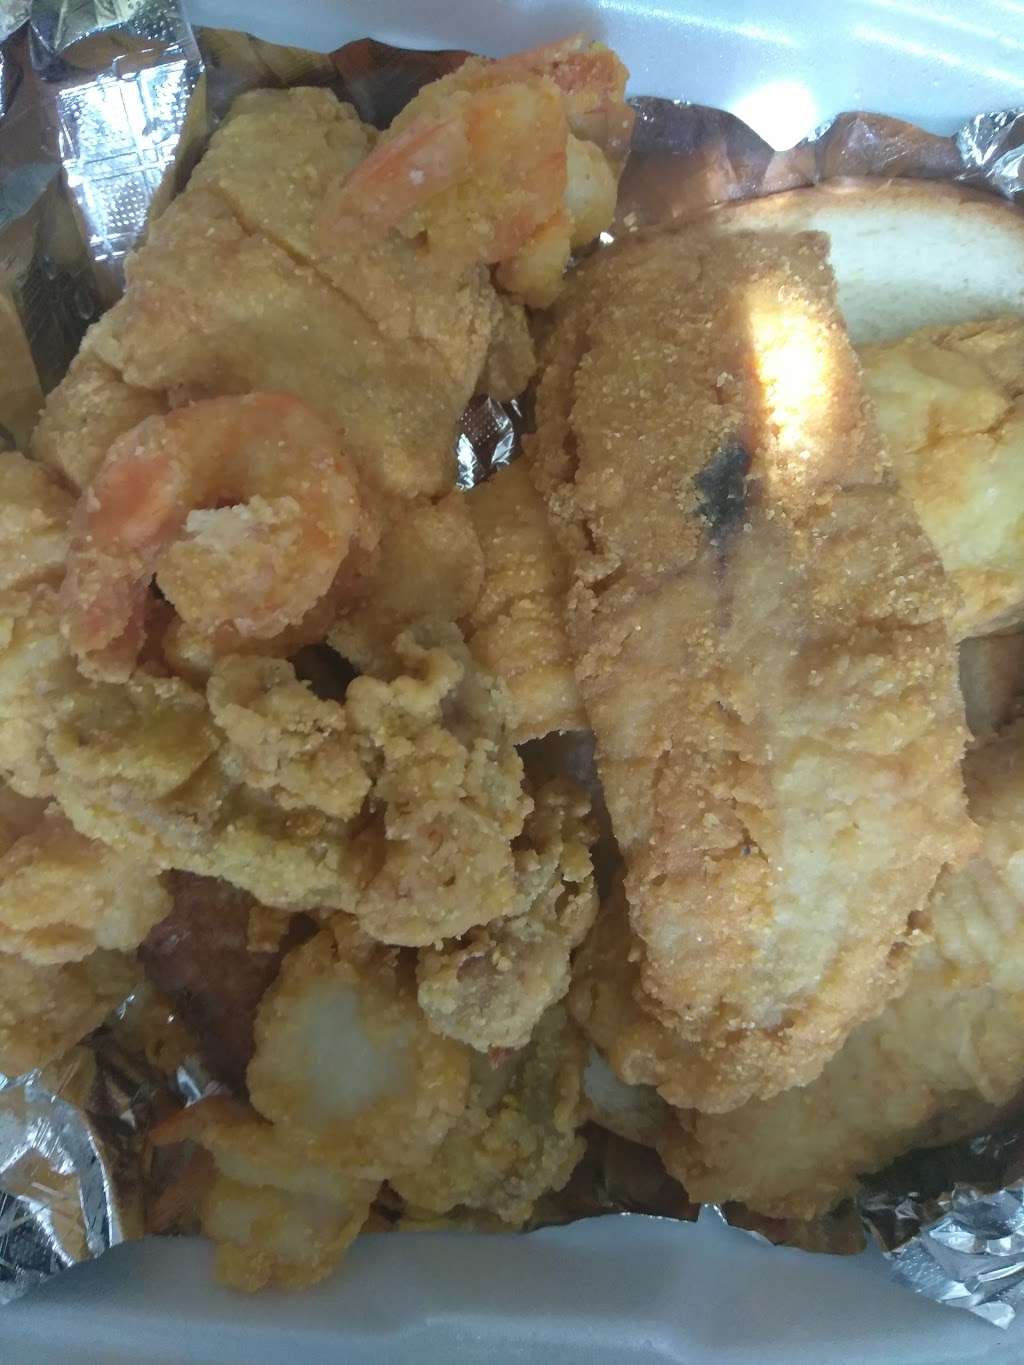 Waltons Seafood Carryout | 3330 Livingston Rd, Indian Head, MD 20640 | Phone: (301) 283-2846